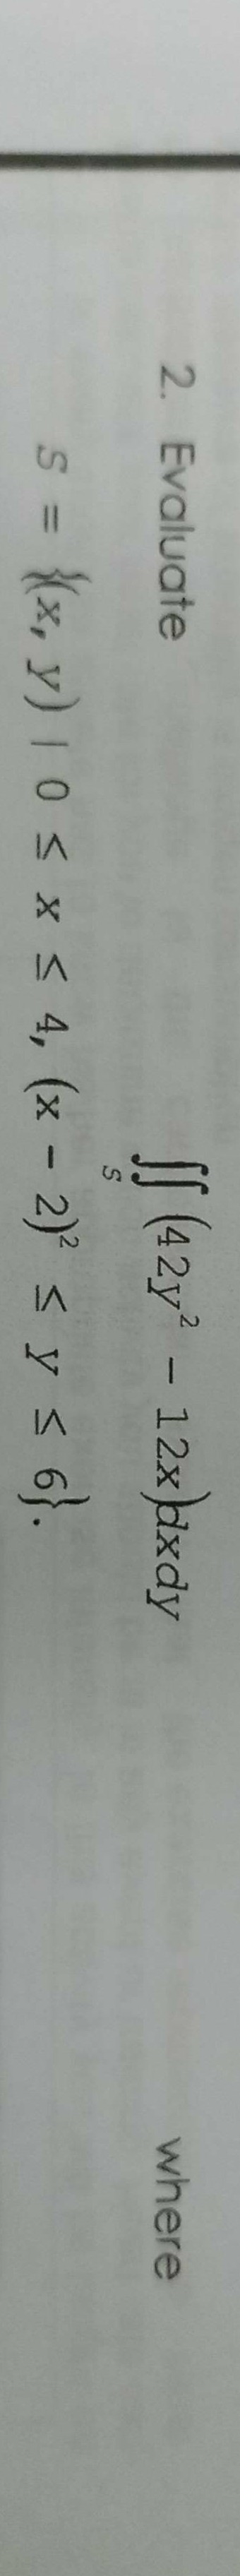 [ (42y- 12xbxdy
2. Evaluate
where
s = {x, y) | 0 sx s 4, (x - 2) s y s 6}.
